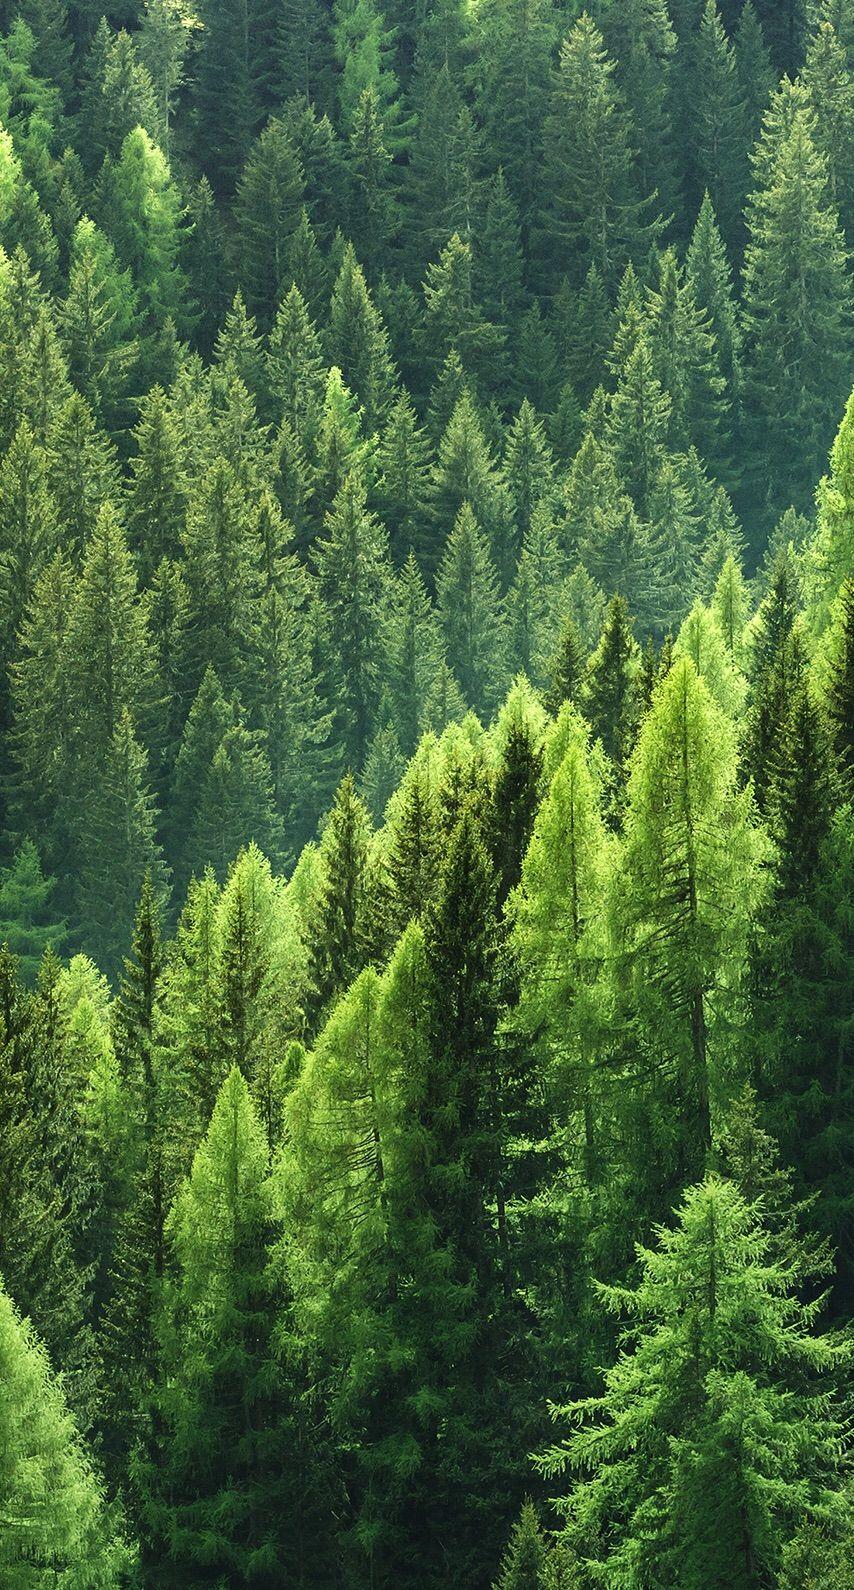 Bright green pine tree forest. Nature. Nature in 2019